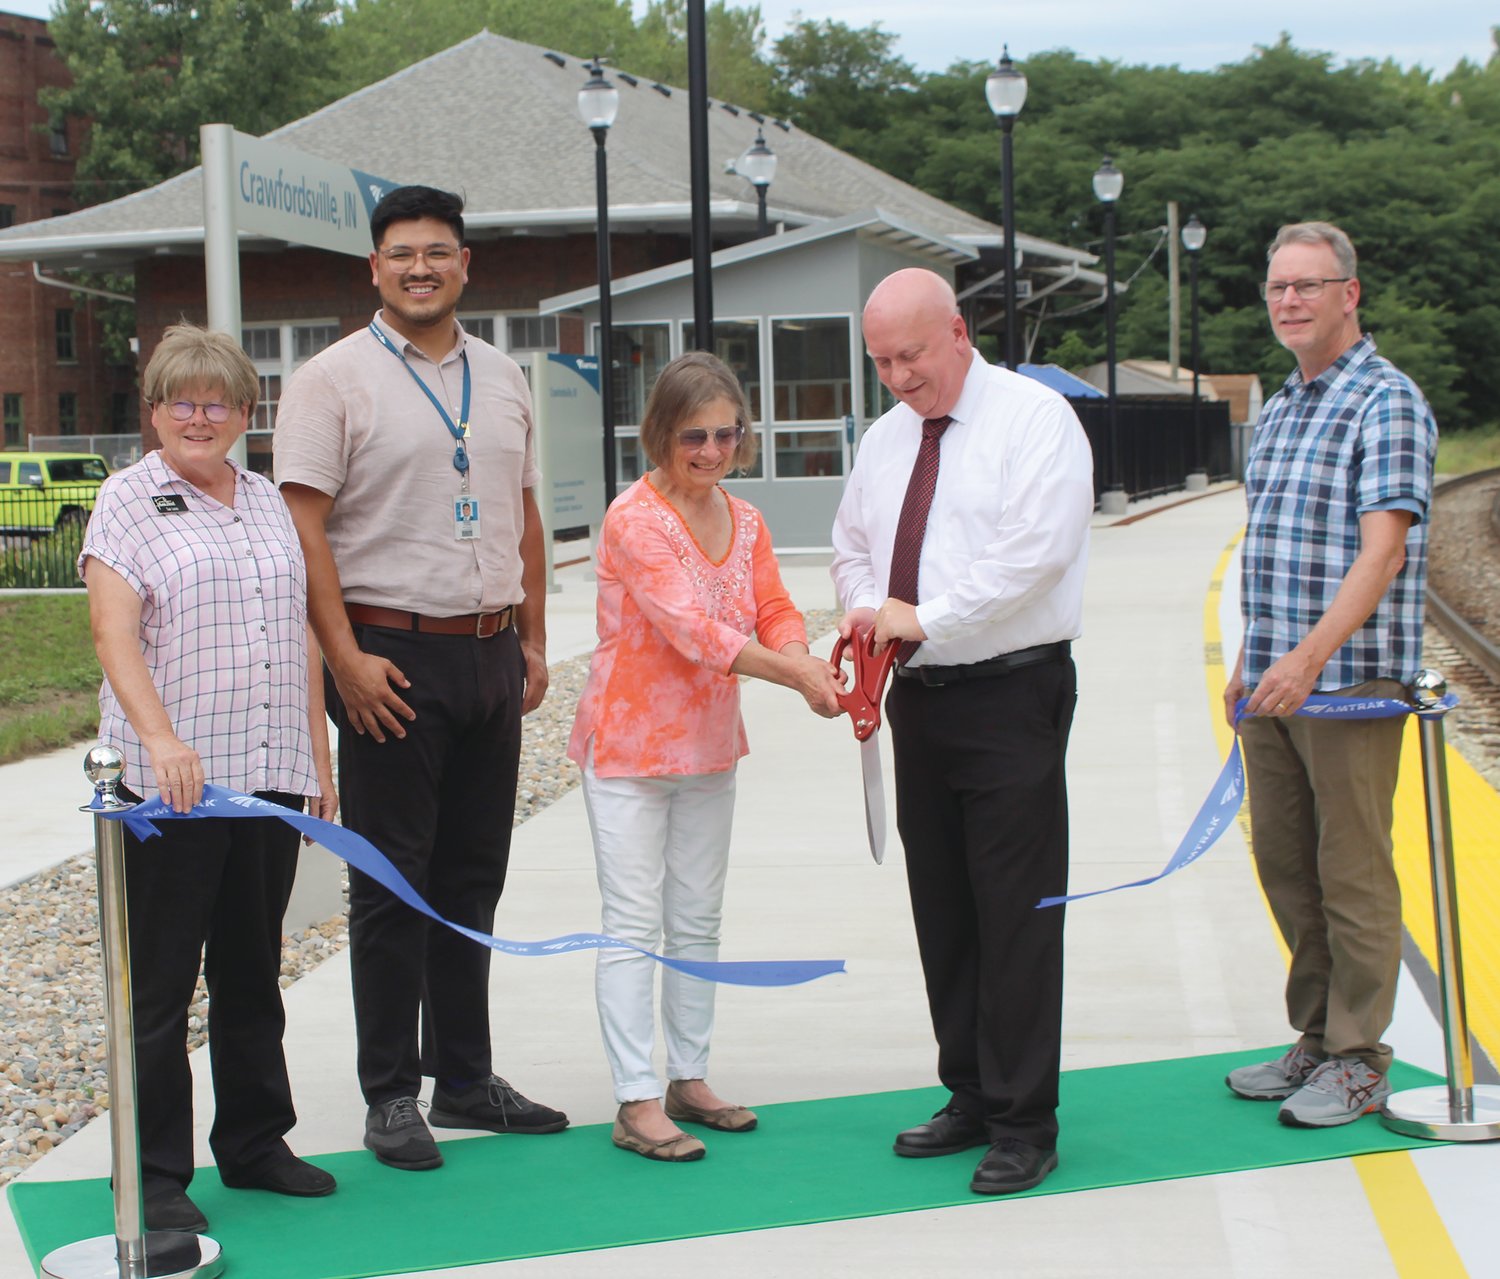 Crawfordsville Mayor Todd Barton and Dr. Helen Hudson cut the ribbon at the newly renovated Amtrak train station in Crawfordsville. They were joined by, from left, Sue Lucas of Crawfordsville Main Street, an Amtrak official and City Councilman Jeff Lucas.